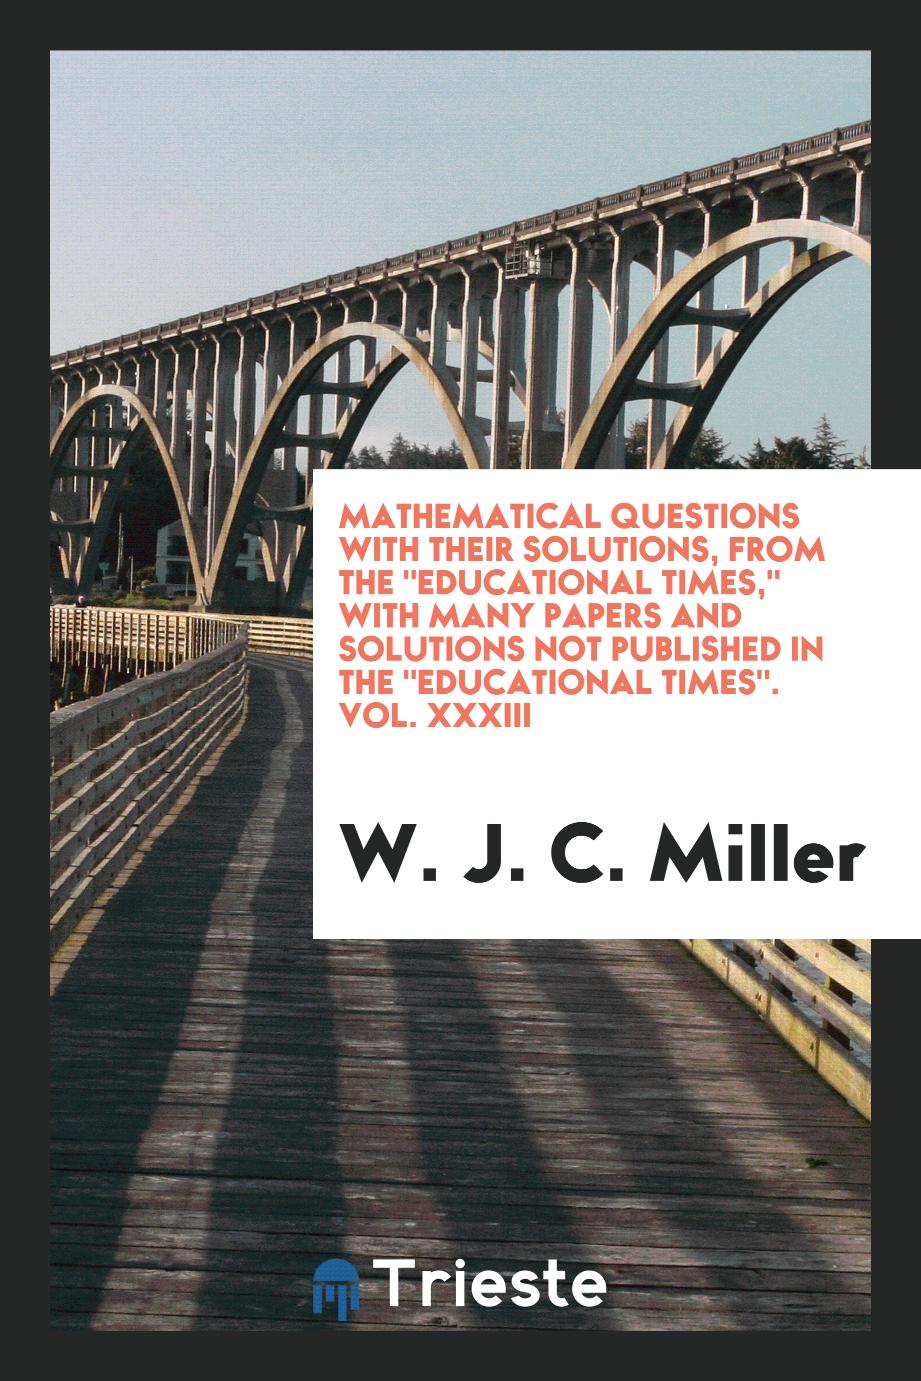 Mathematical Questions with Their Solutions, from The "Educational Times," with Many Papers and Solutions Not Published in The "Educational Times". Vol. XXXIII